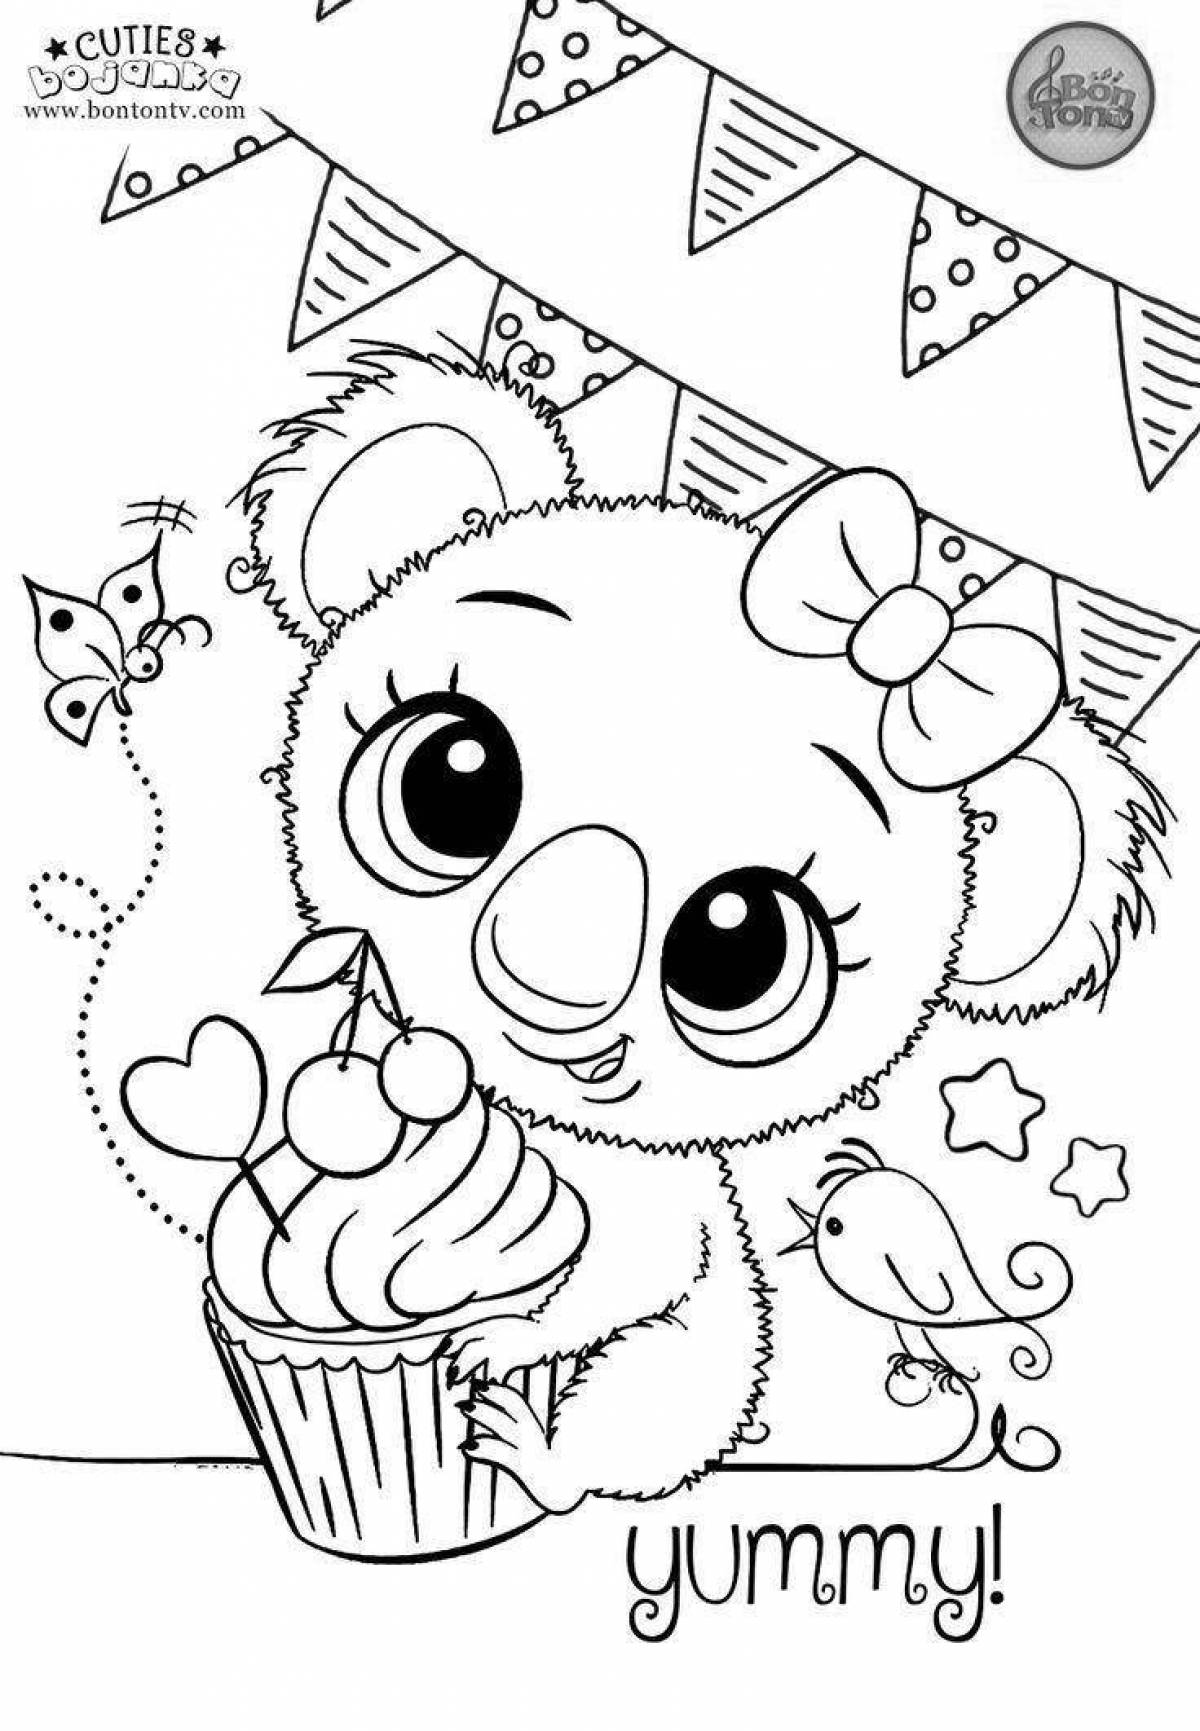 Fabulous girl happy birthday coloring page